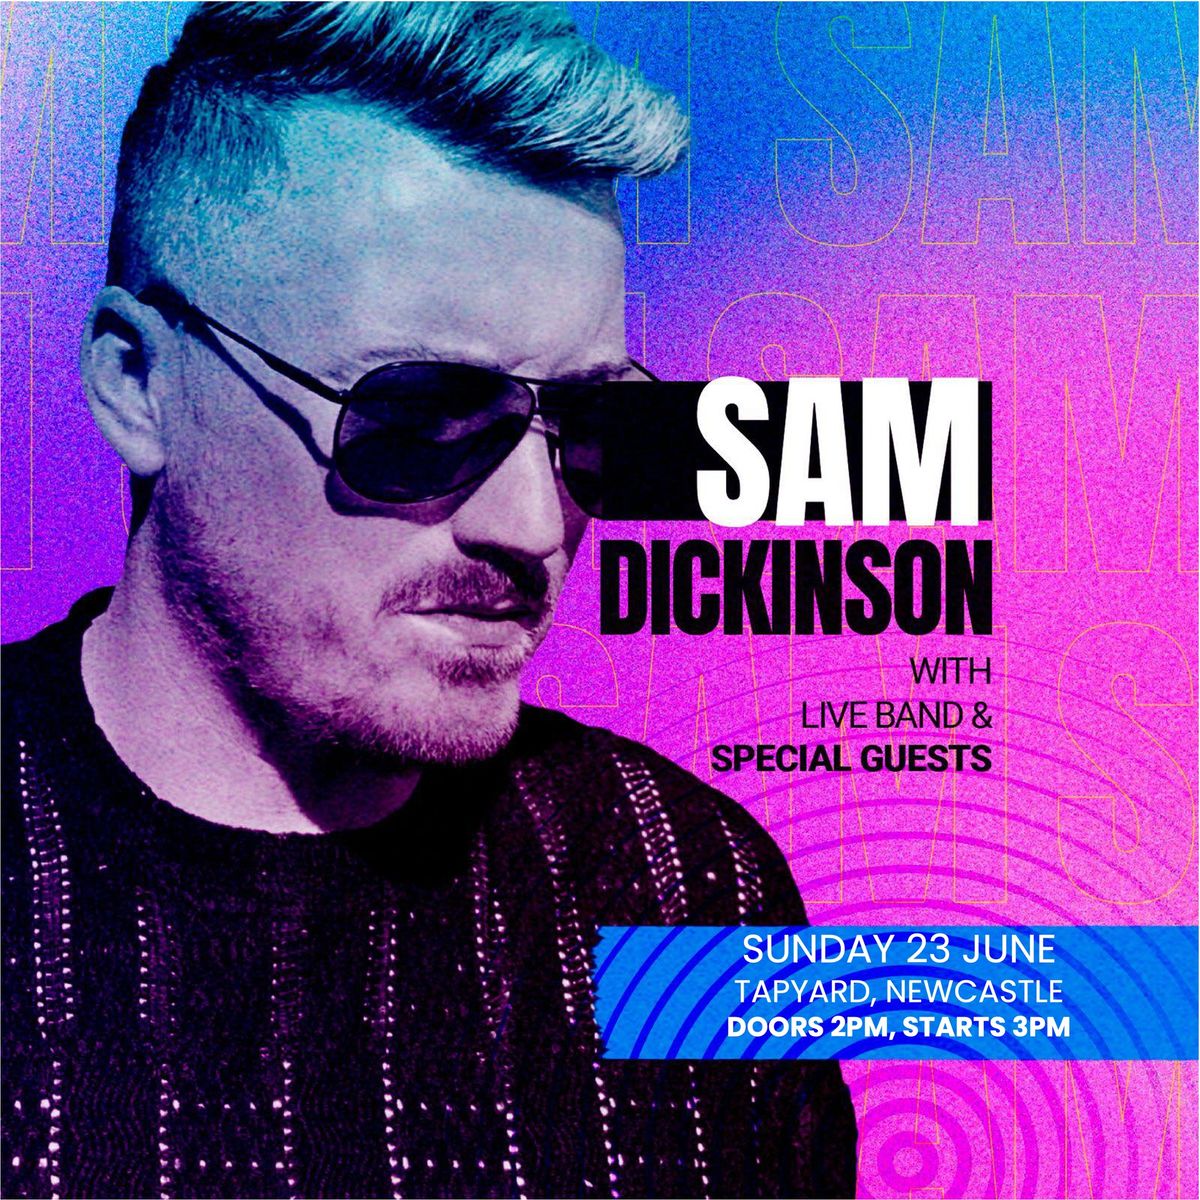 SAM DICKINSON LIVE WITH BAND + SUPPORT